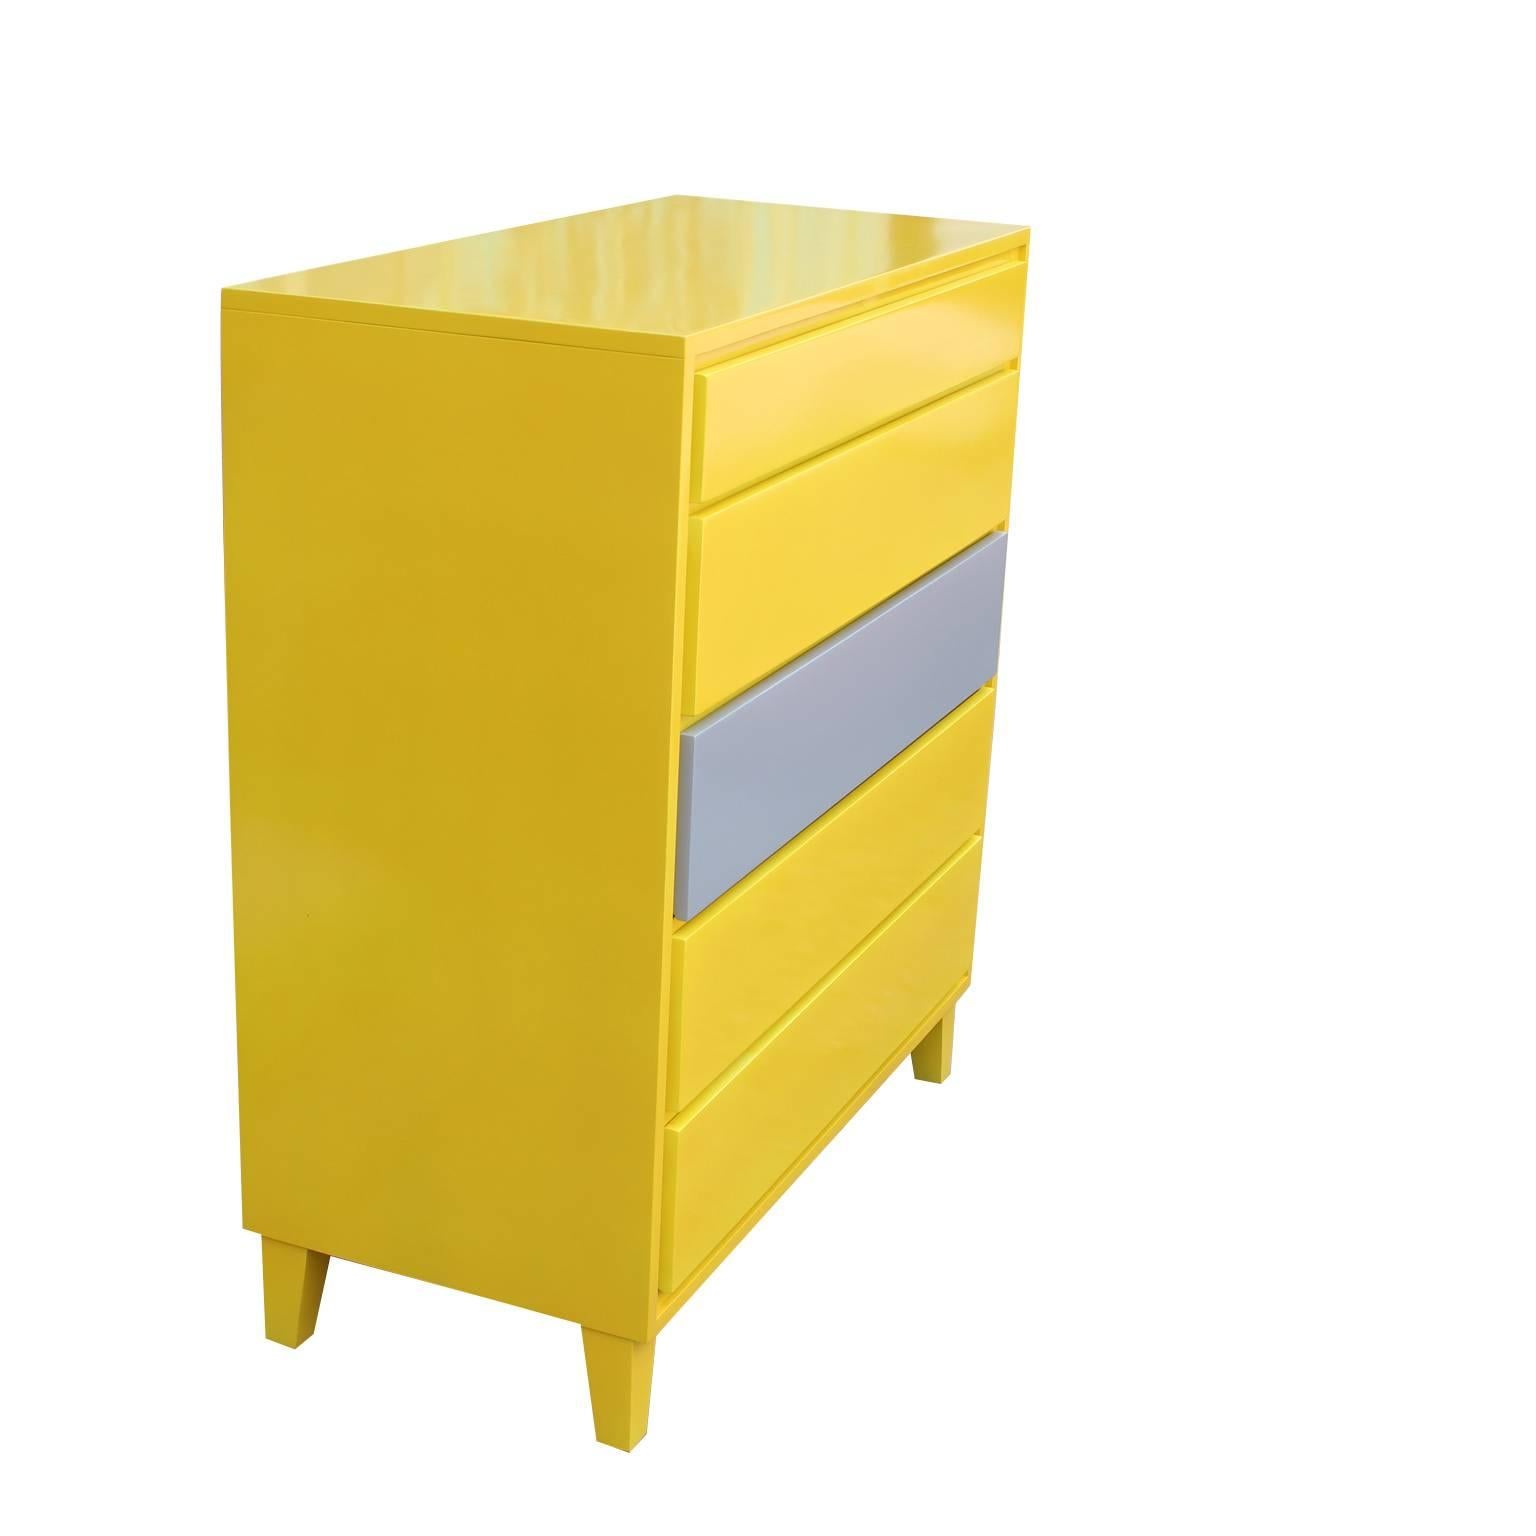 Modern Conant ball Furniture Company six-drawer dresser recently lacquered in yellow and with a grey accent drawer. The second drawer is divided into three sections for easy organization, while the other drawers are normal.